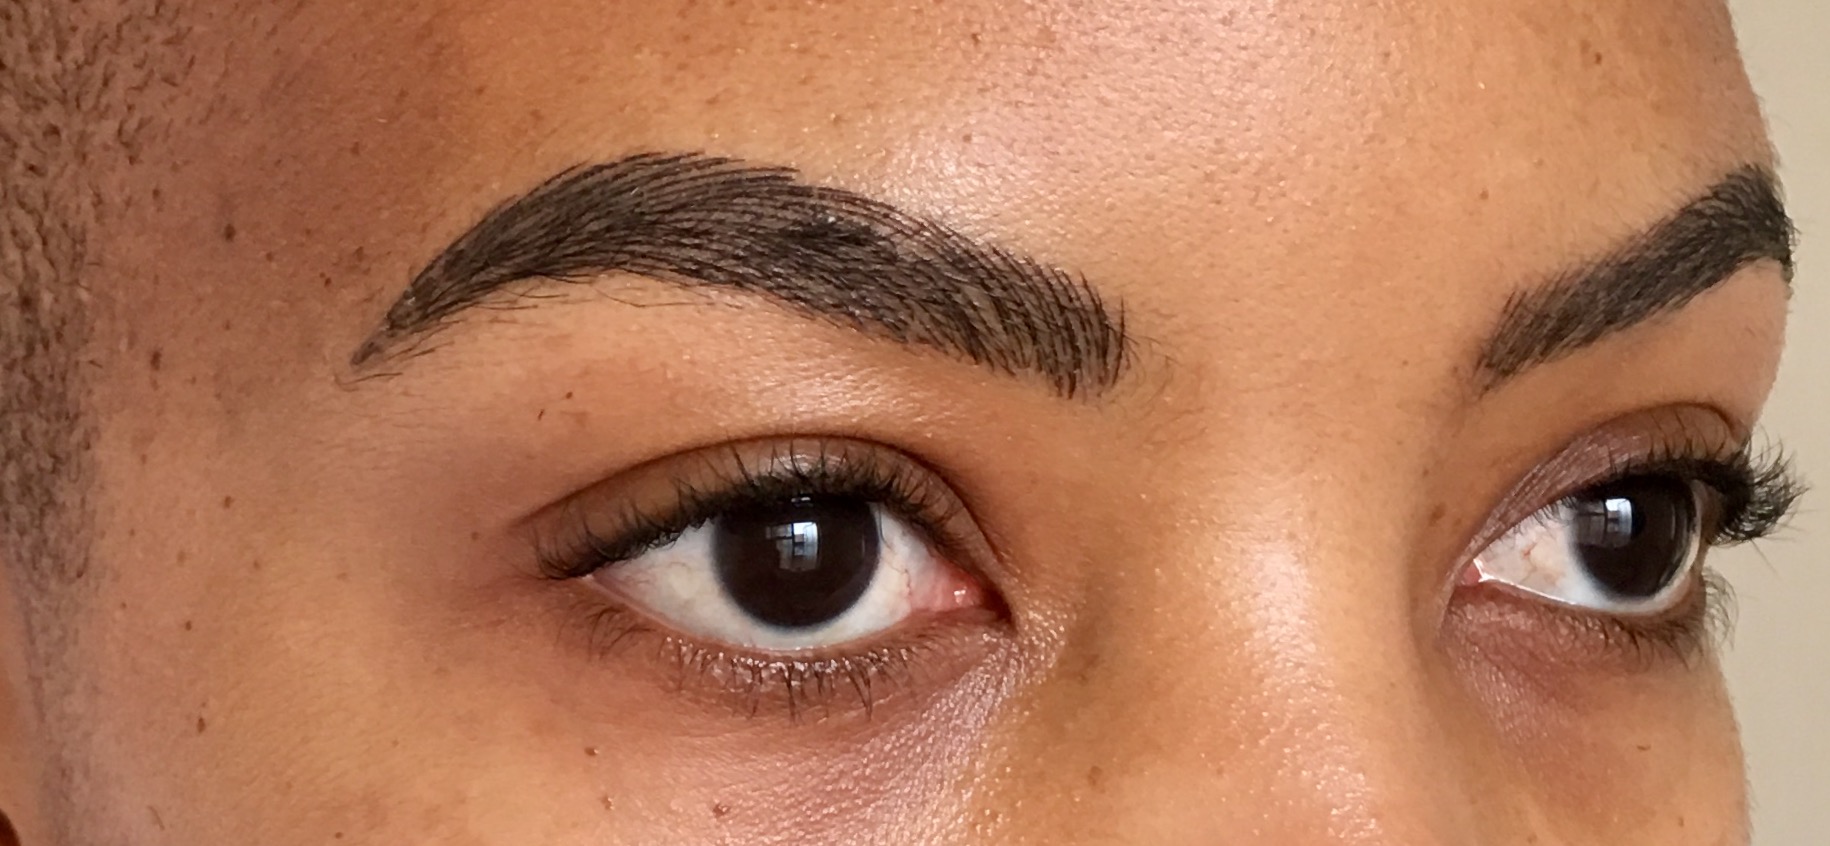 StagesOfHealingMicroblading